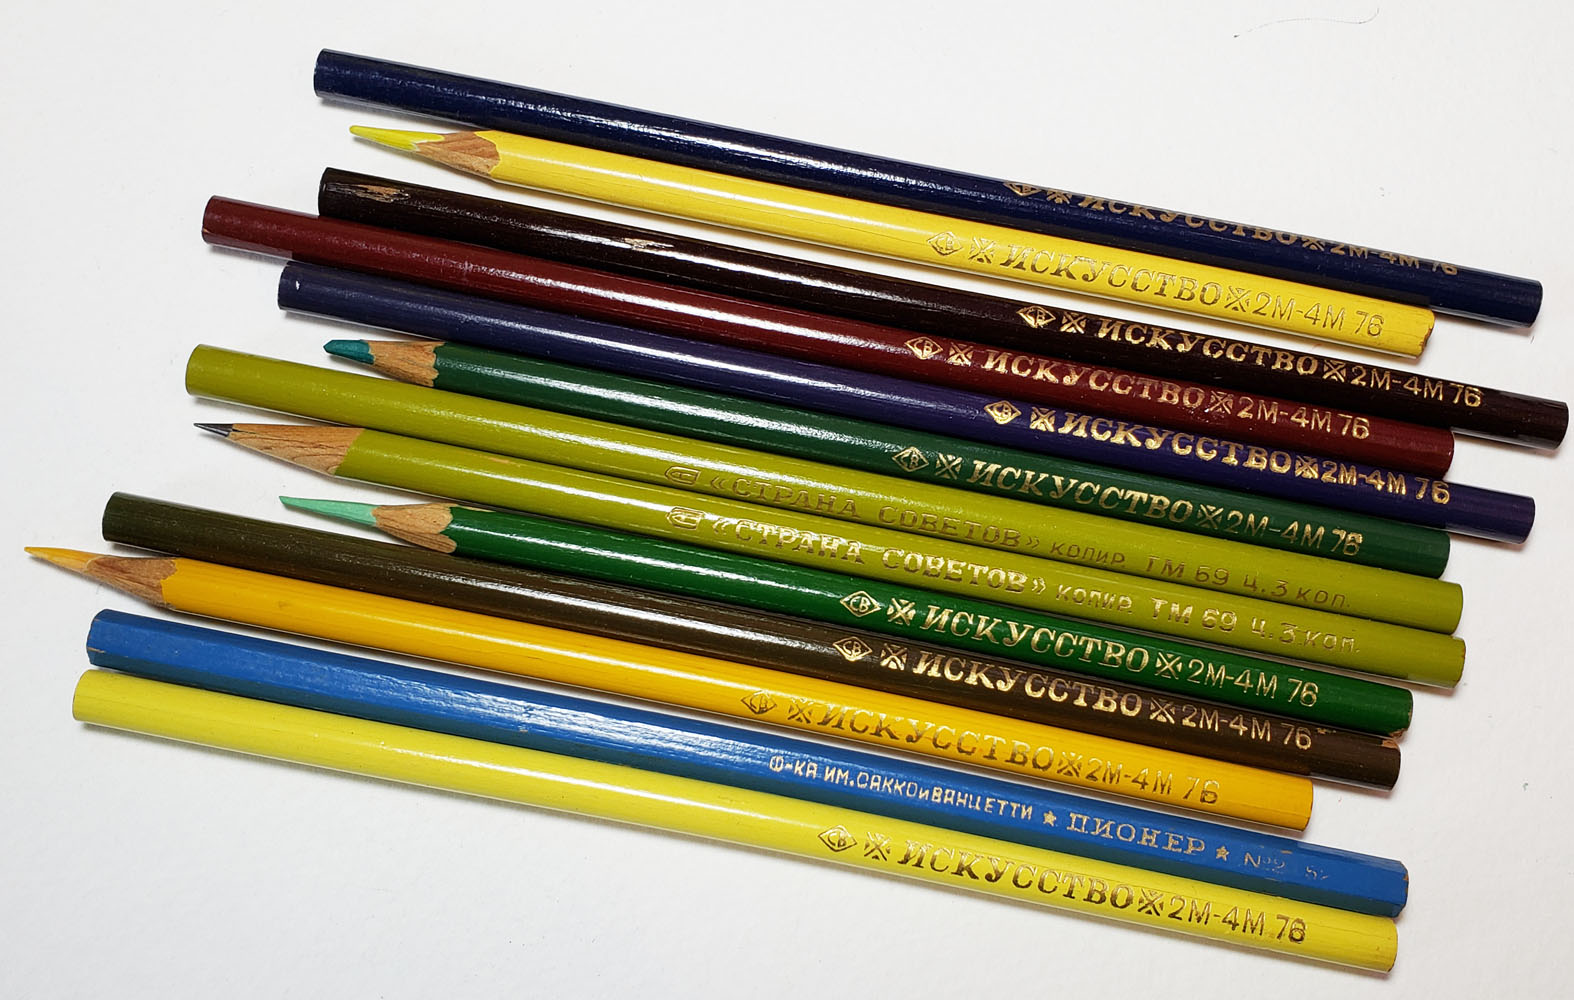 Beginner's guide to graphite drawing pencils | RapidFireArt